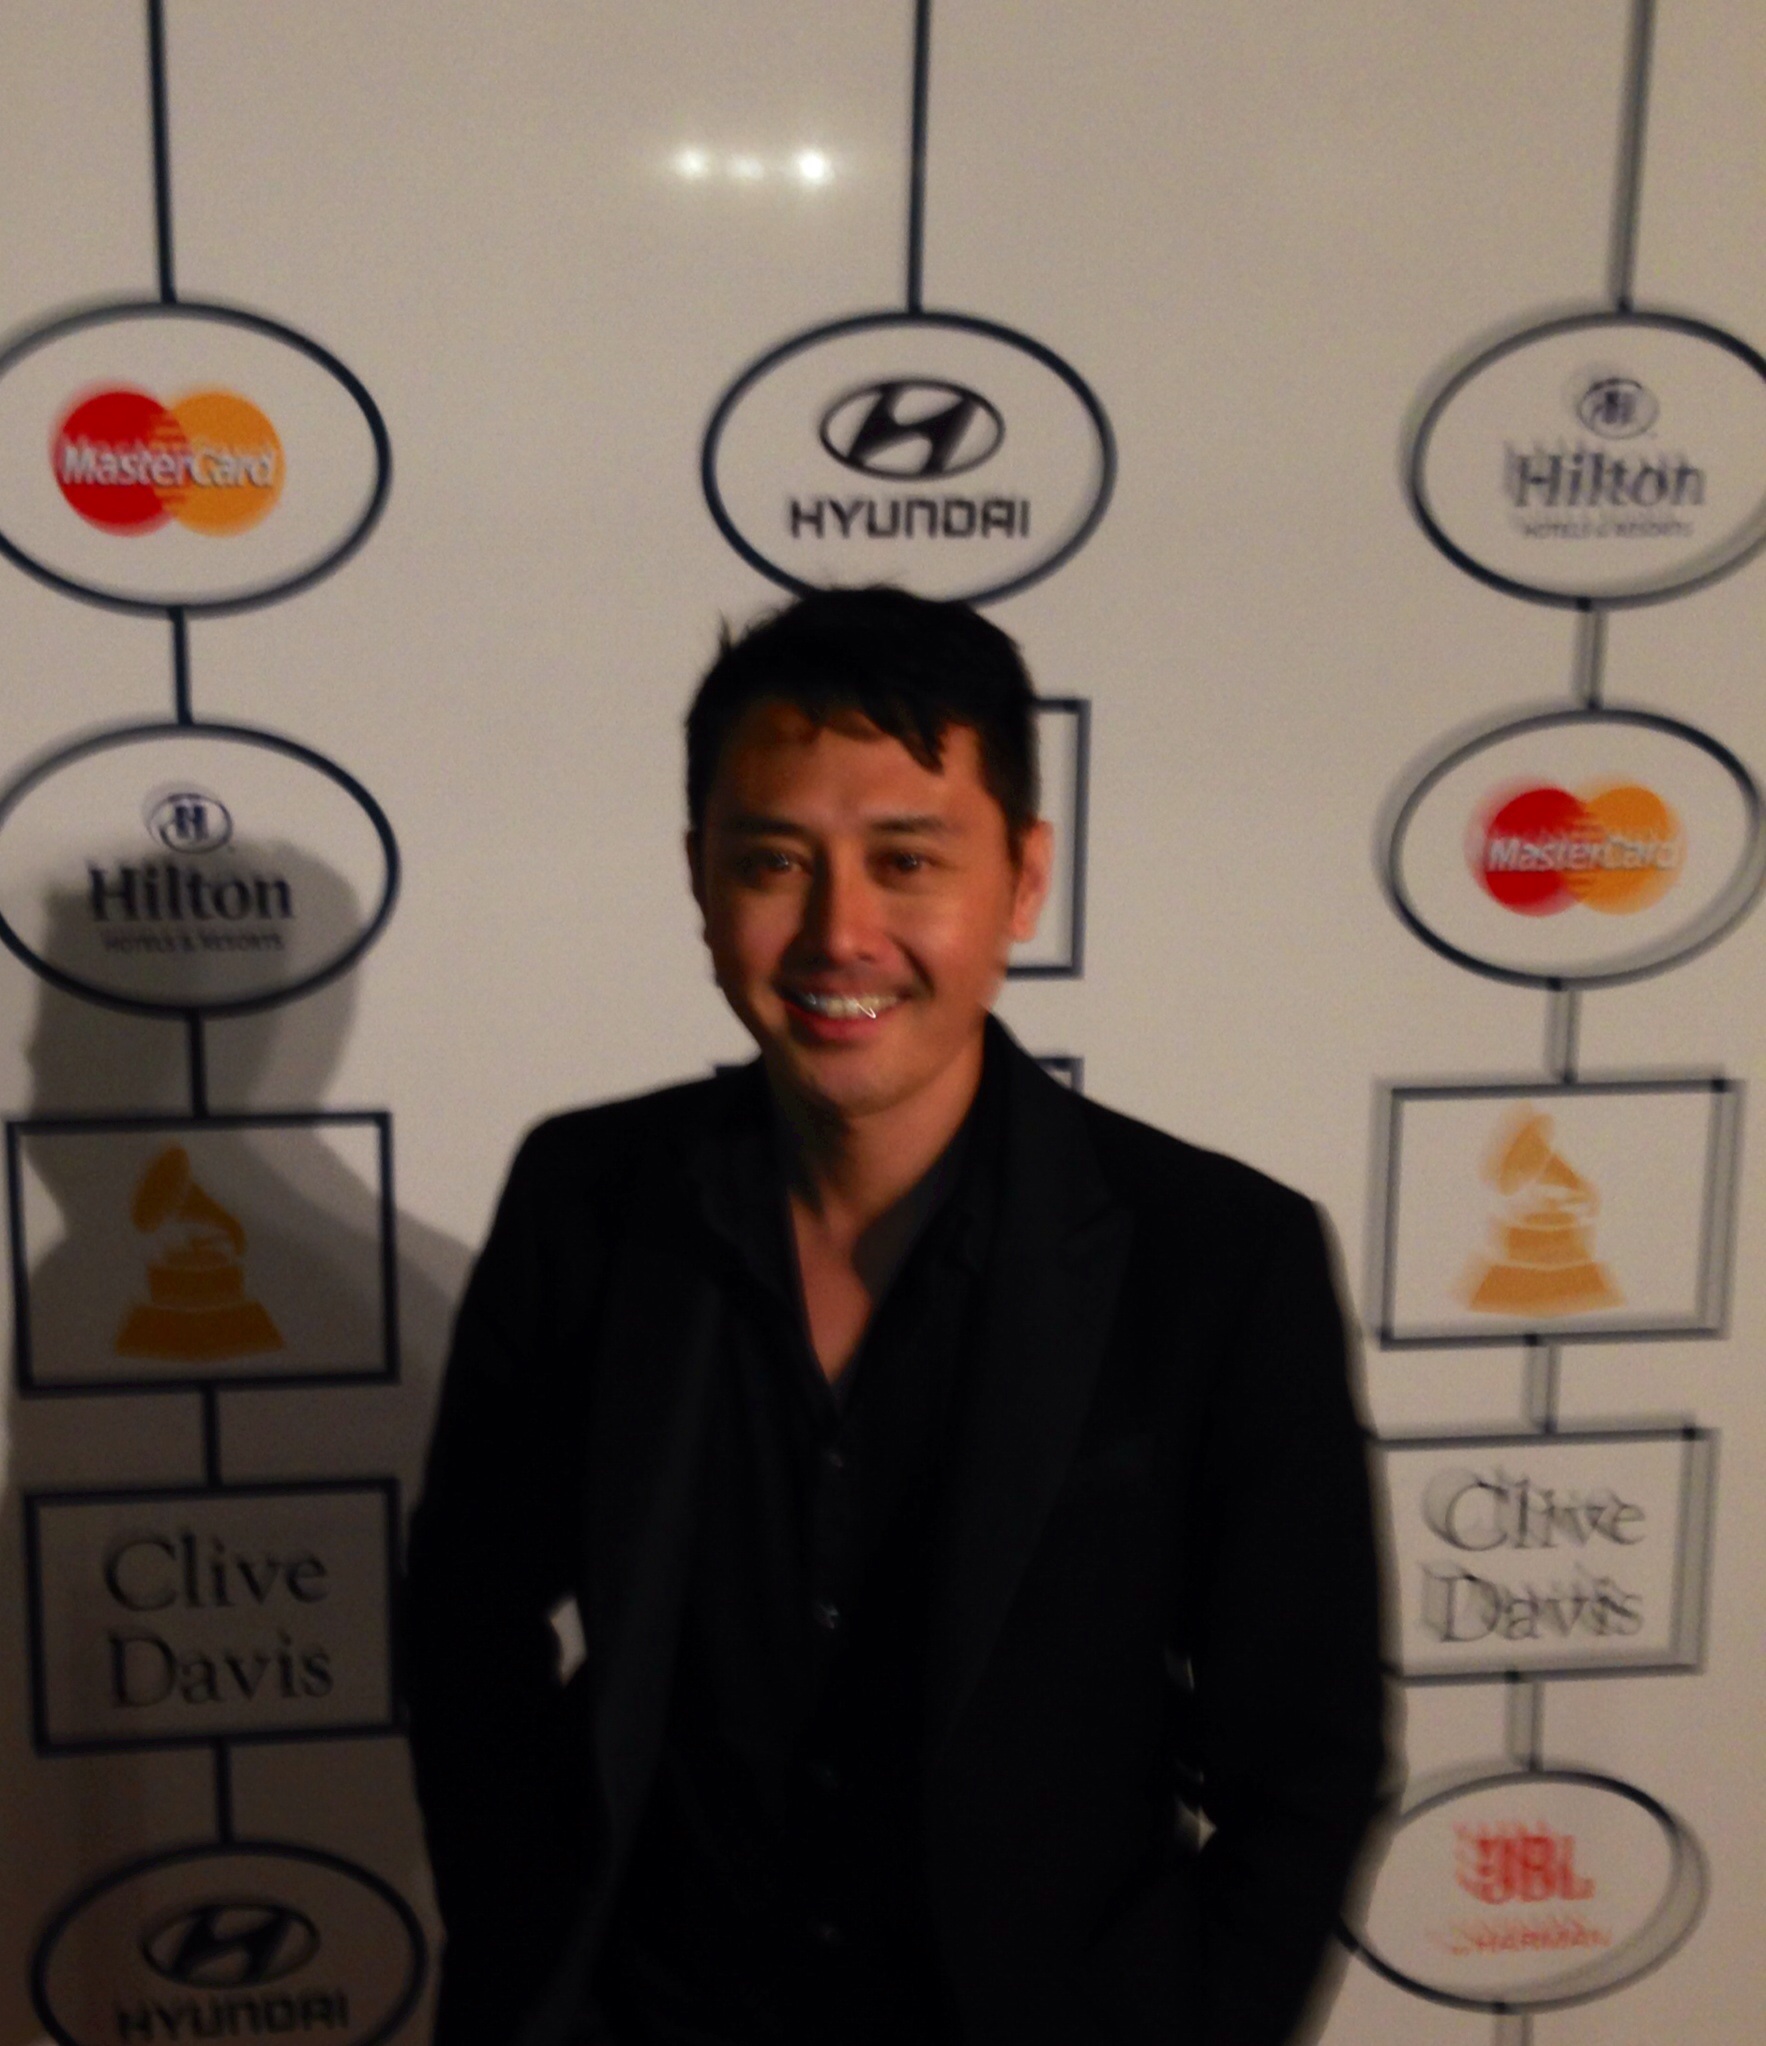 Clive Davis sure knows how to throw a shindig at The Beverly Hilton a night before the Grammys - Jan 25, 2014.